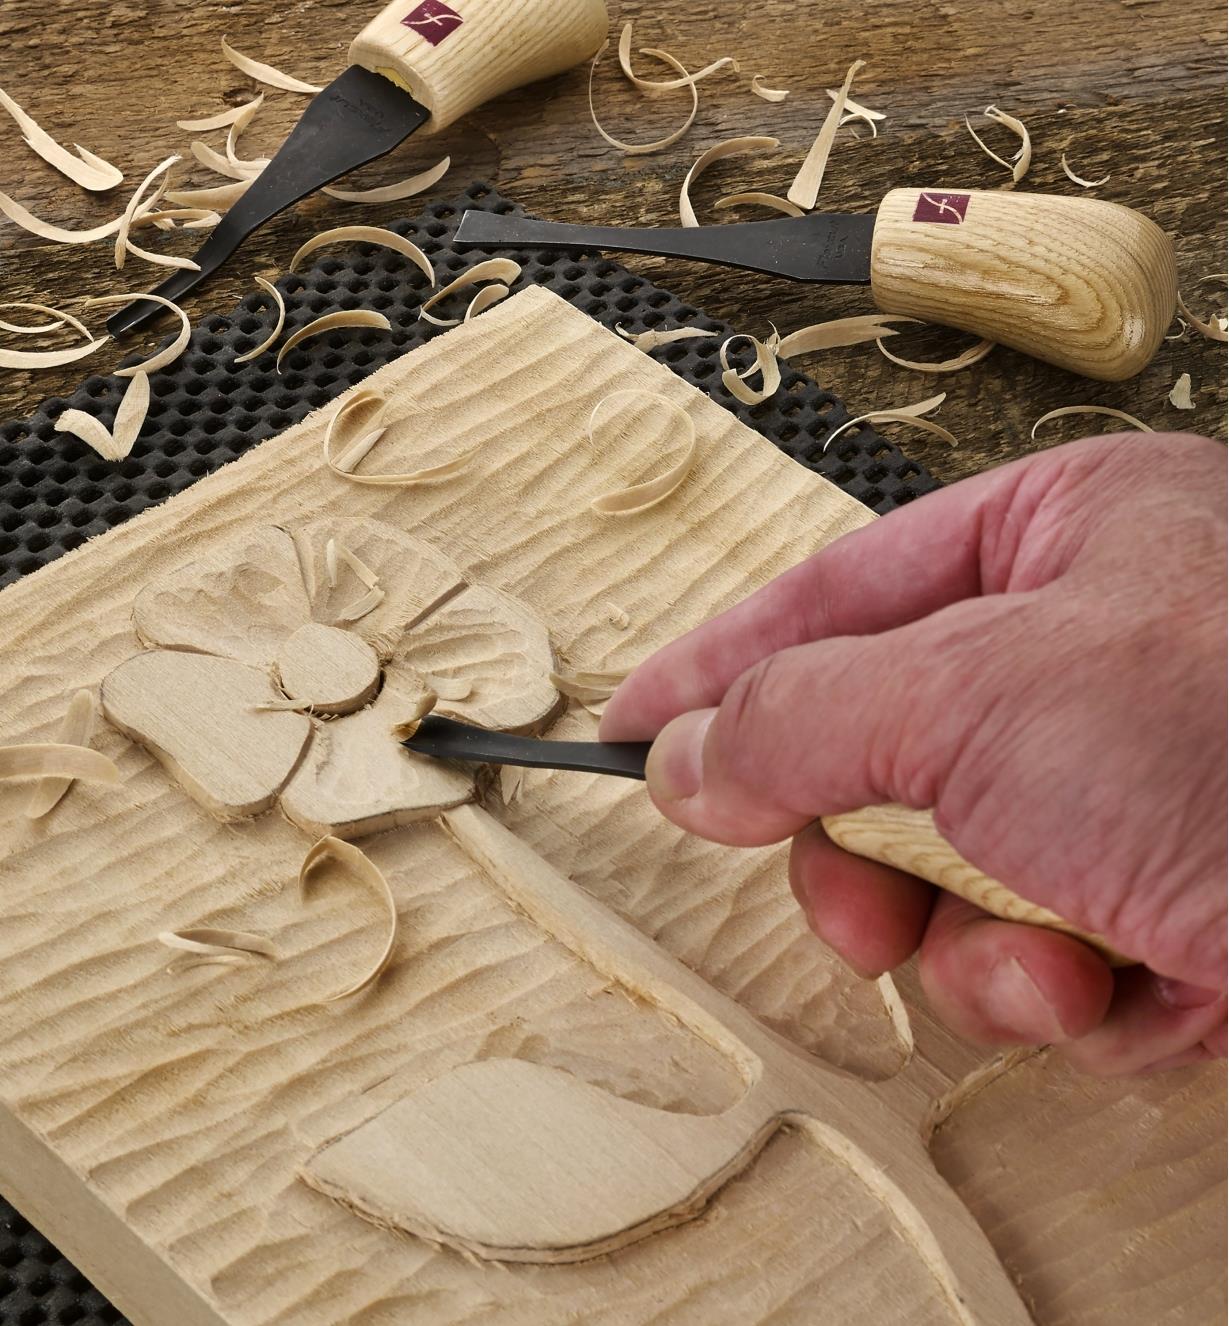 A carver uses a gouge from the palm-carving set to work on a low-relief panel carving